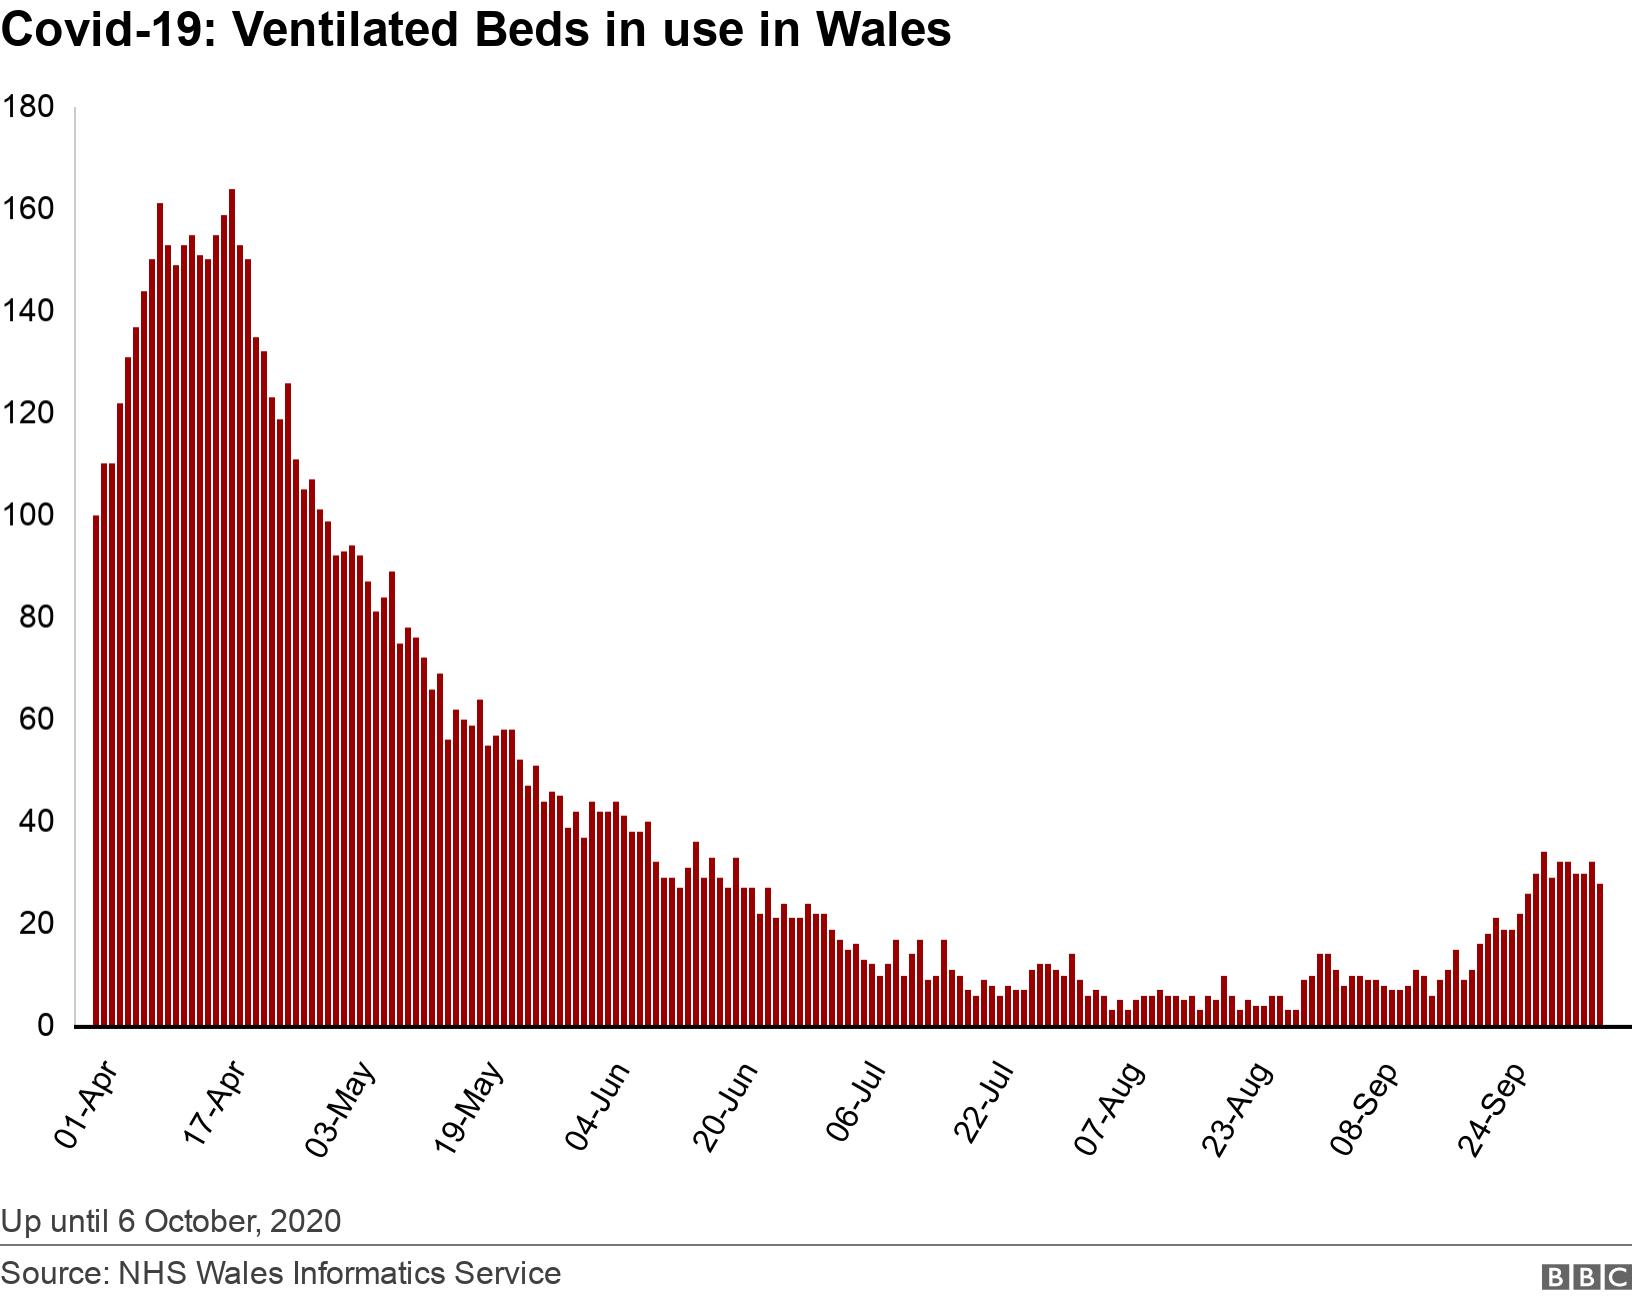 Covid-19: Ventilated Beds in use in Wales. . Number of invasive ventilated beds being used in Welsh hospitals by patients with Covid-19 Up until 6 October, 2020.